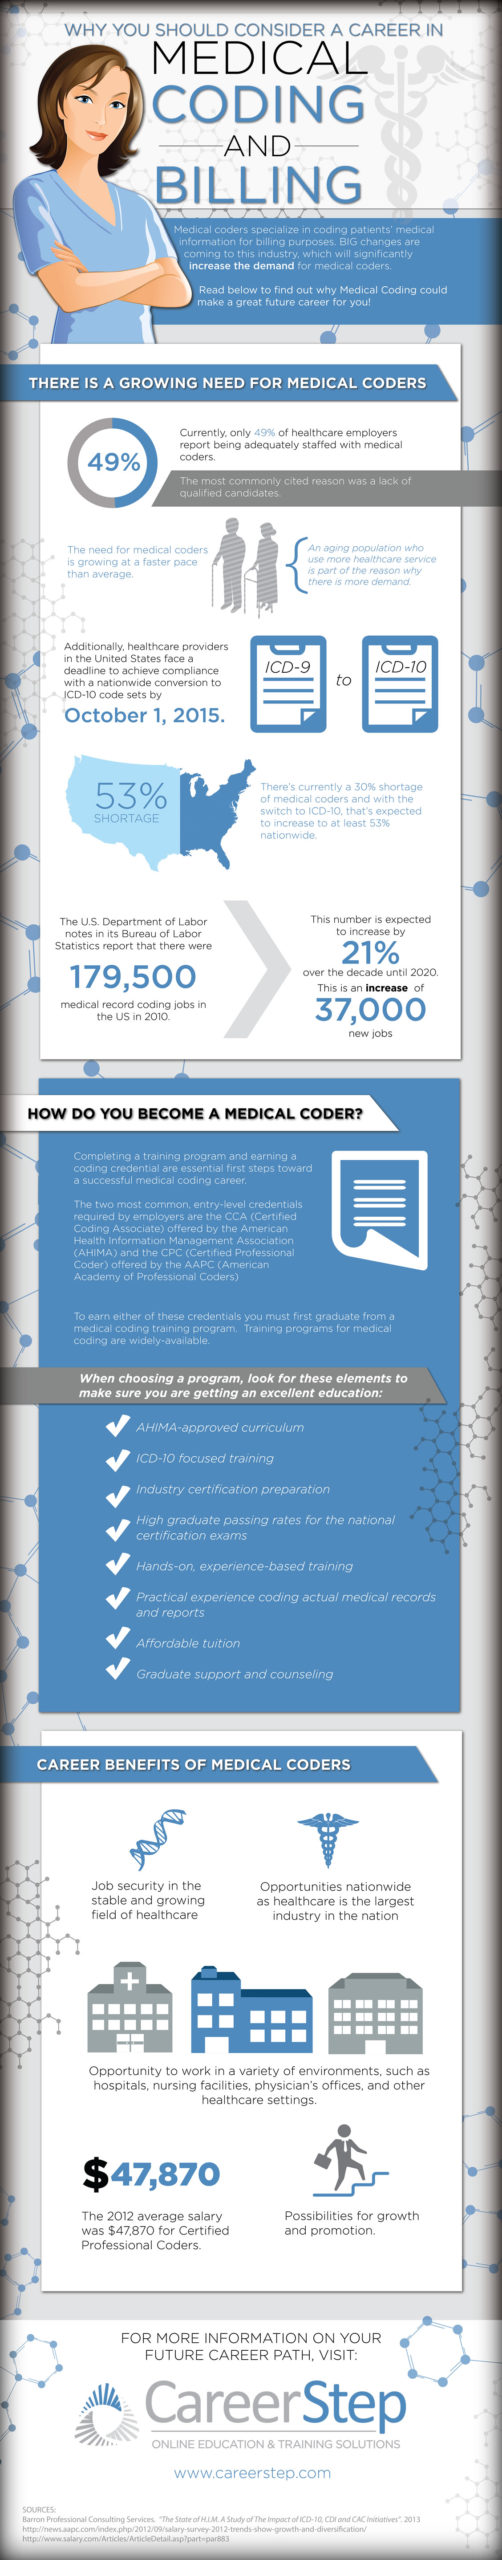 infographic with details about medical coding and billing